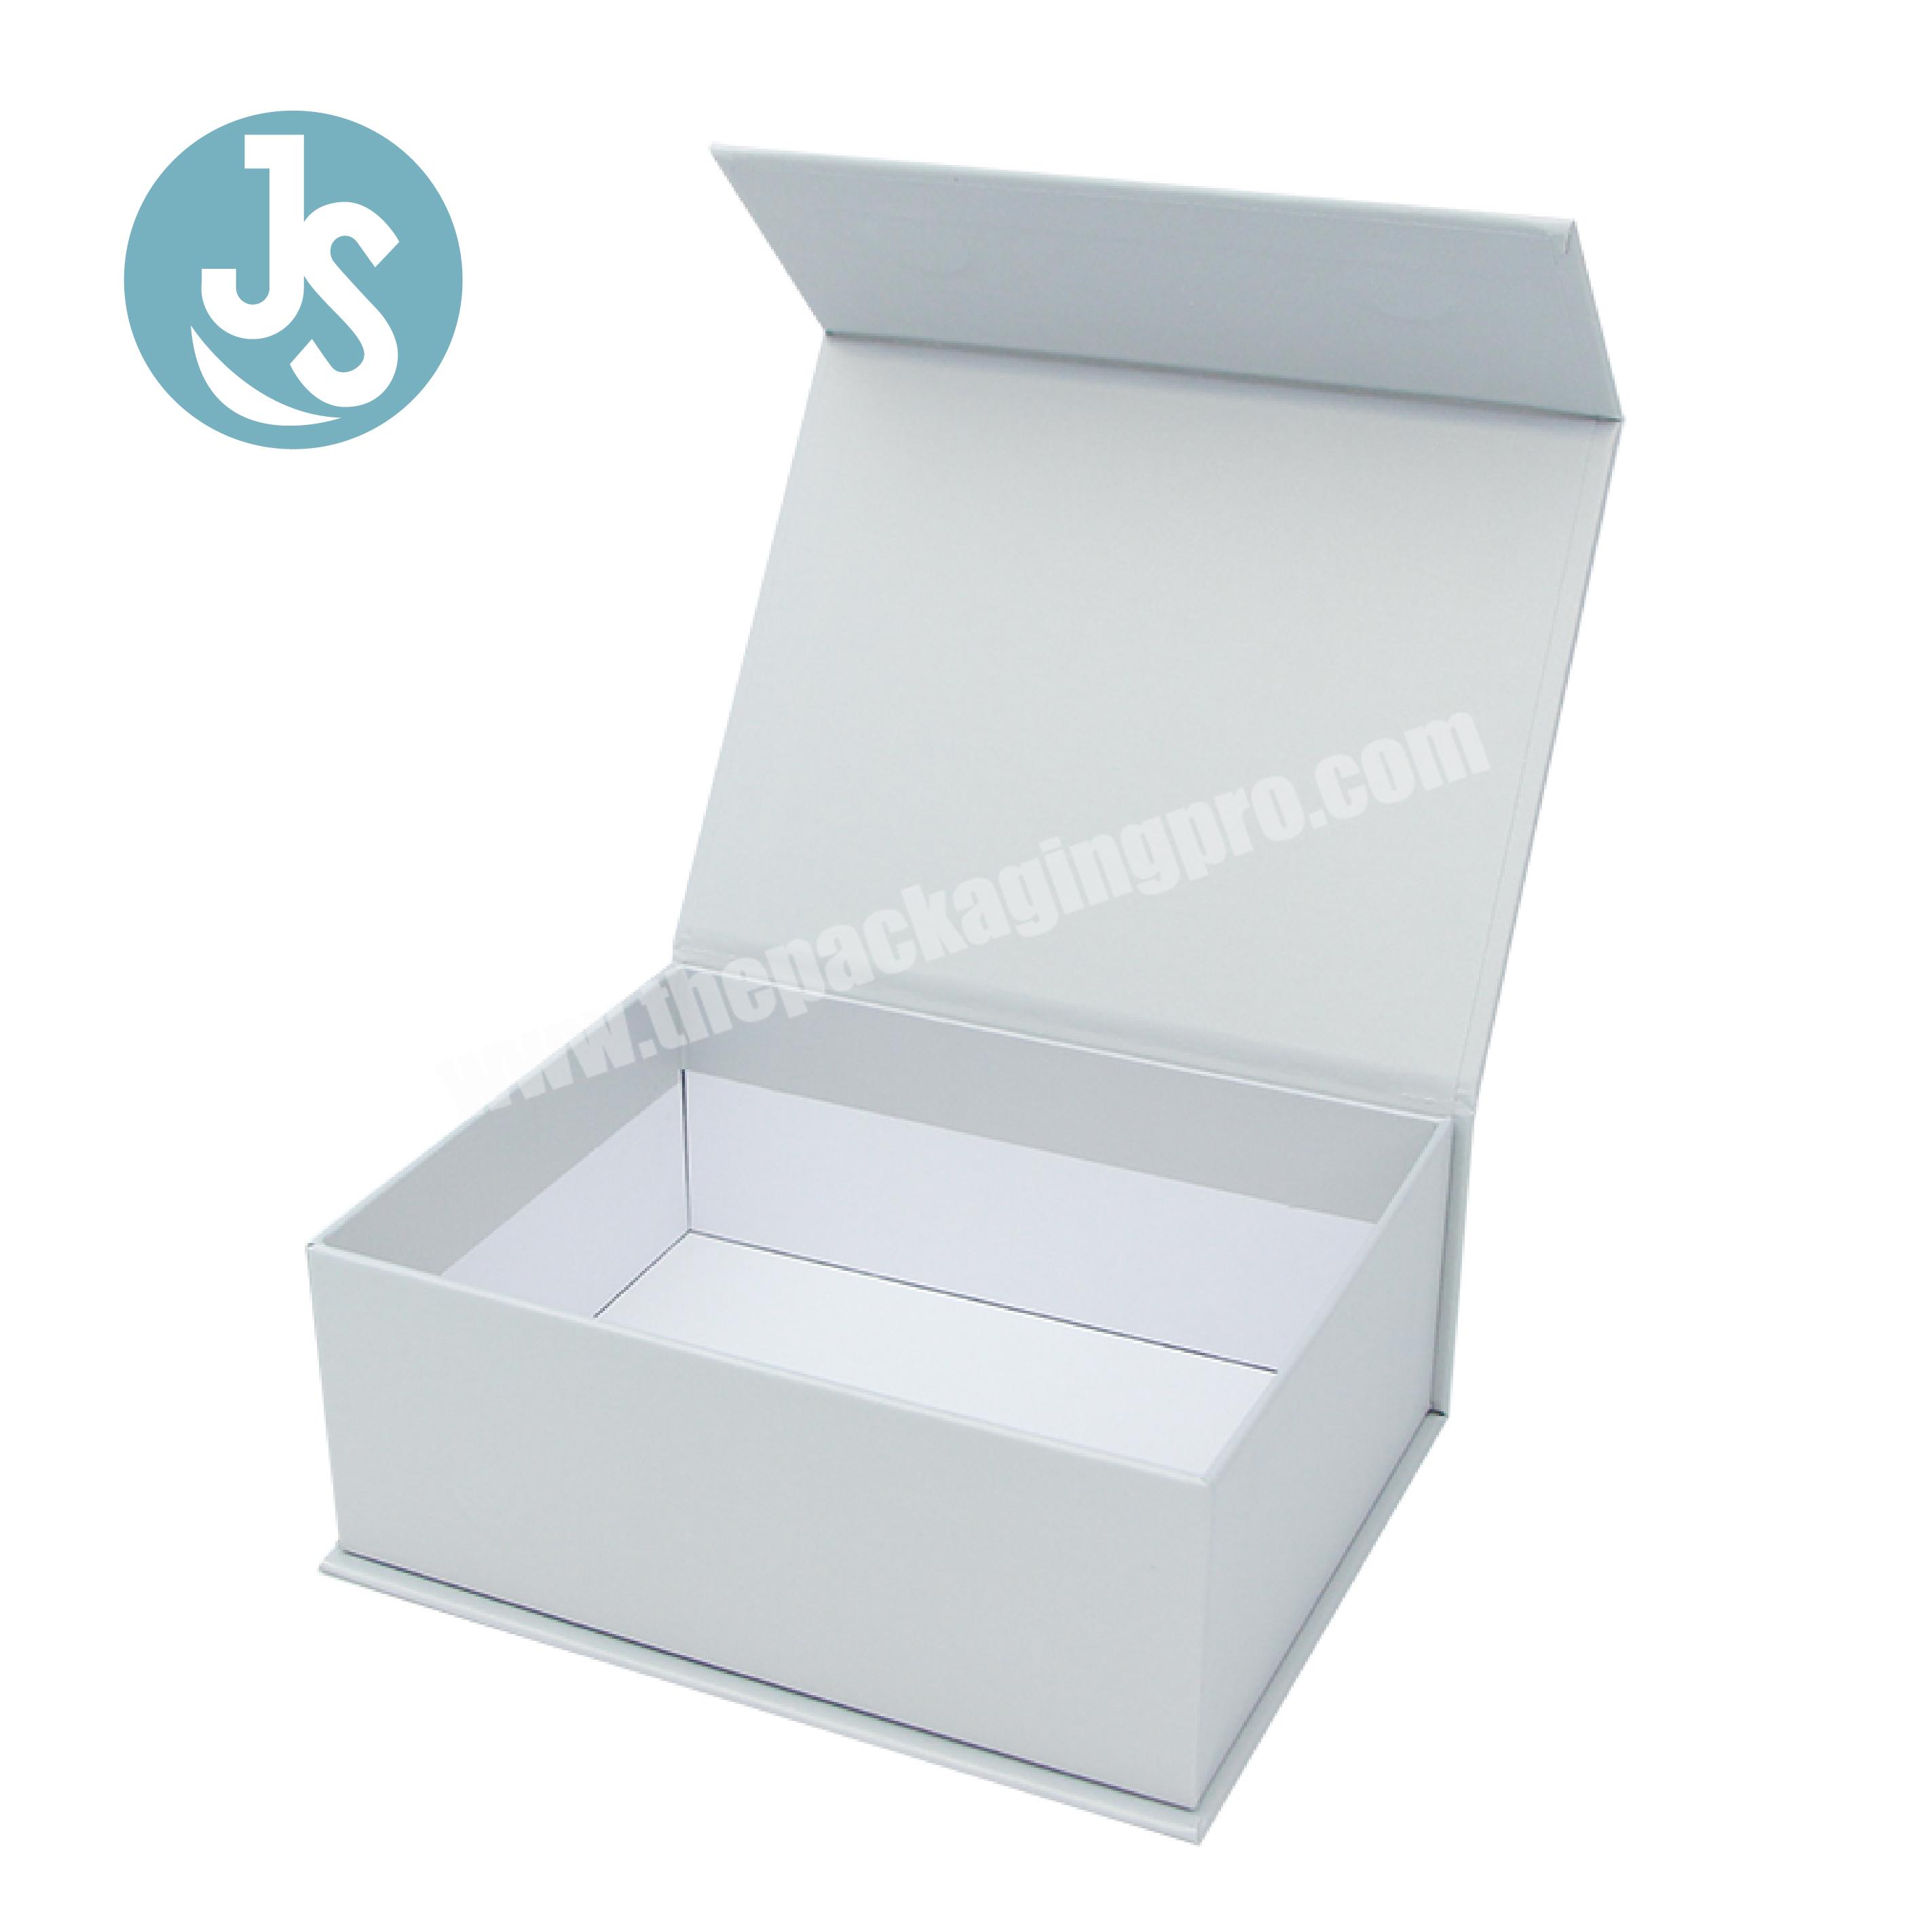 Amazon Branded Box Luxury Magnetic White Folding Boxes Electronic Product Special Paper Hot Stamping Packaging Gift Box Foldable